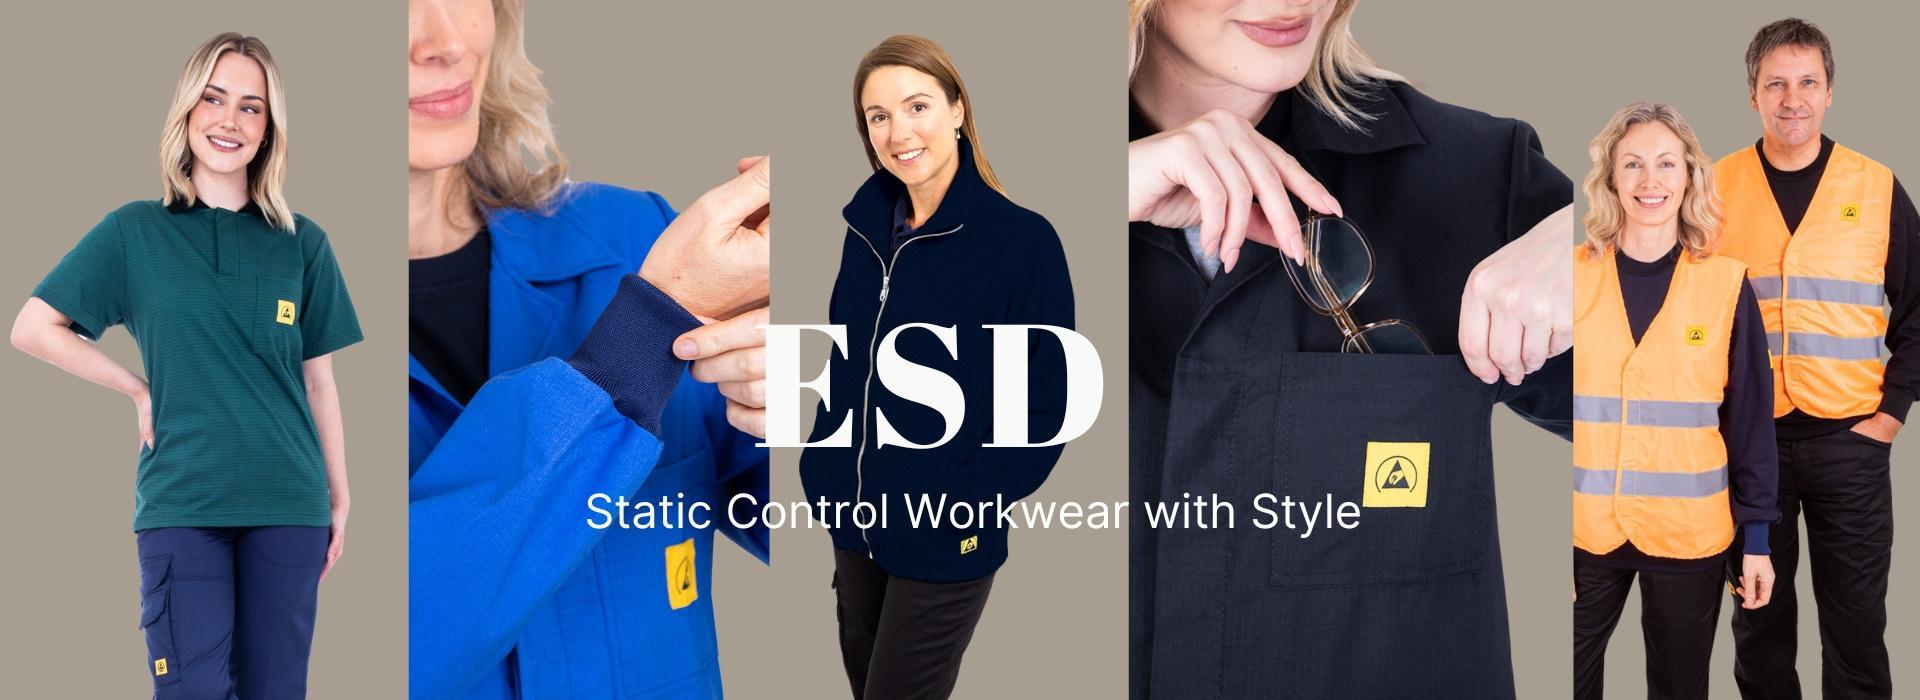 ESD Workwear with Style